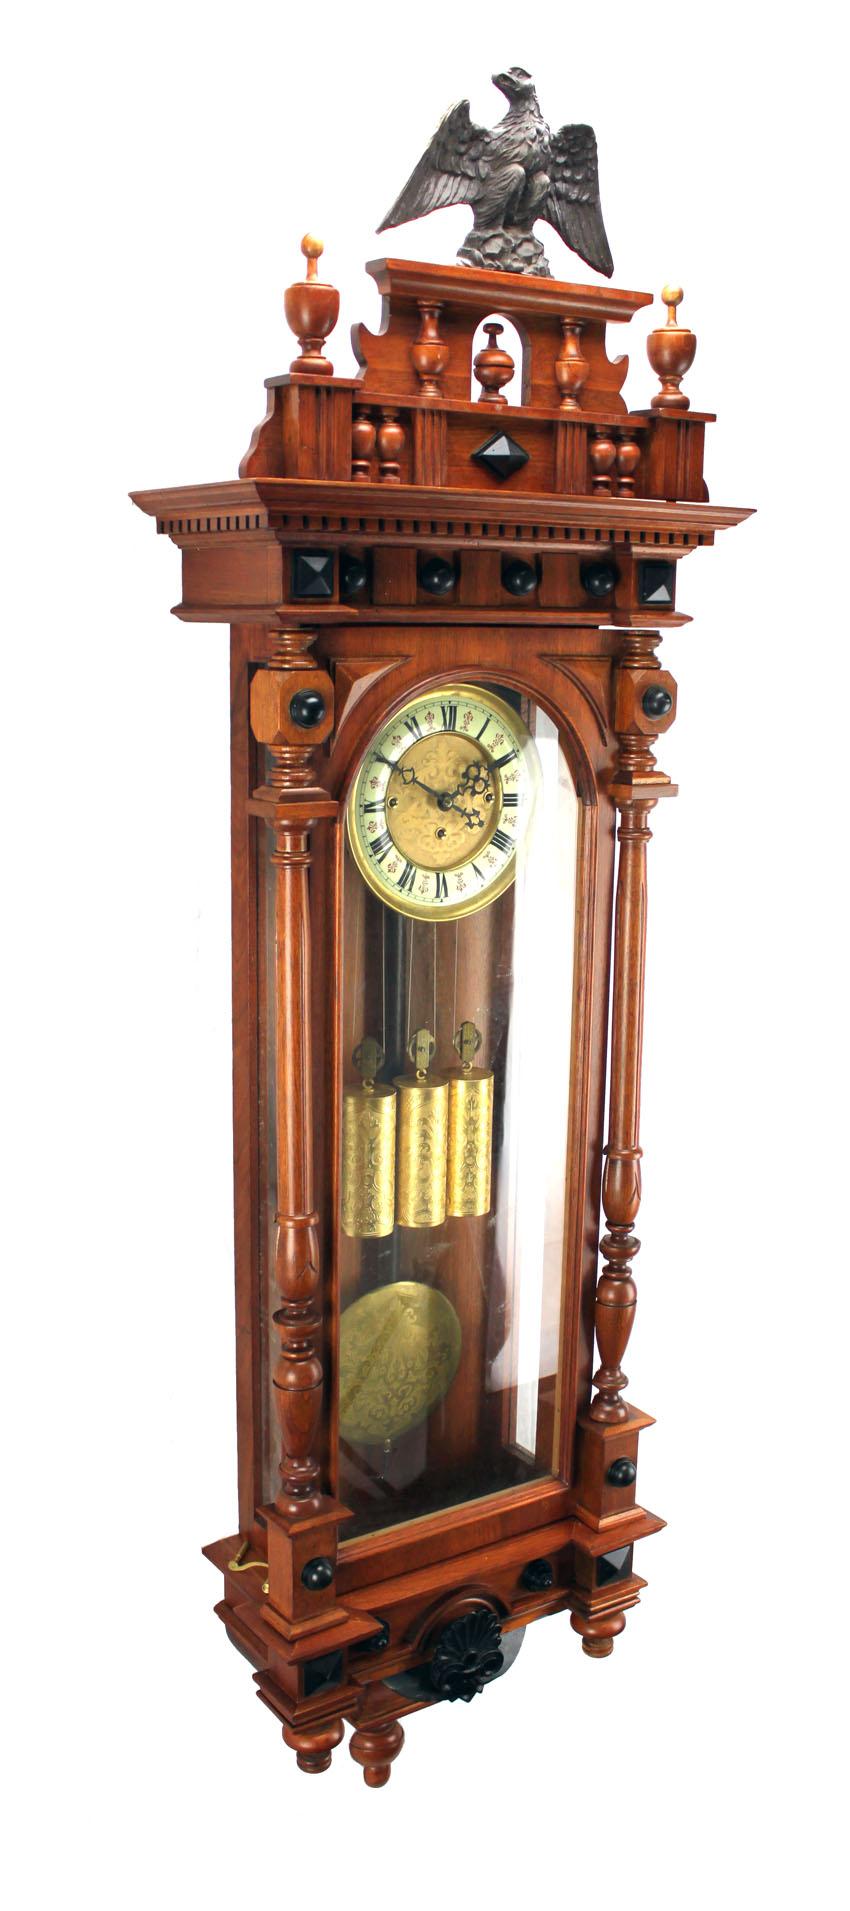 Here is an excellent 3 weight driven regulator wall clock. This clock is 57-1/2